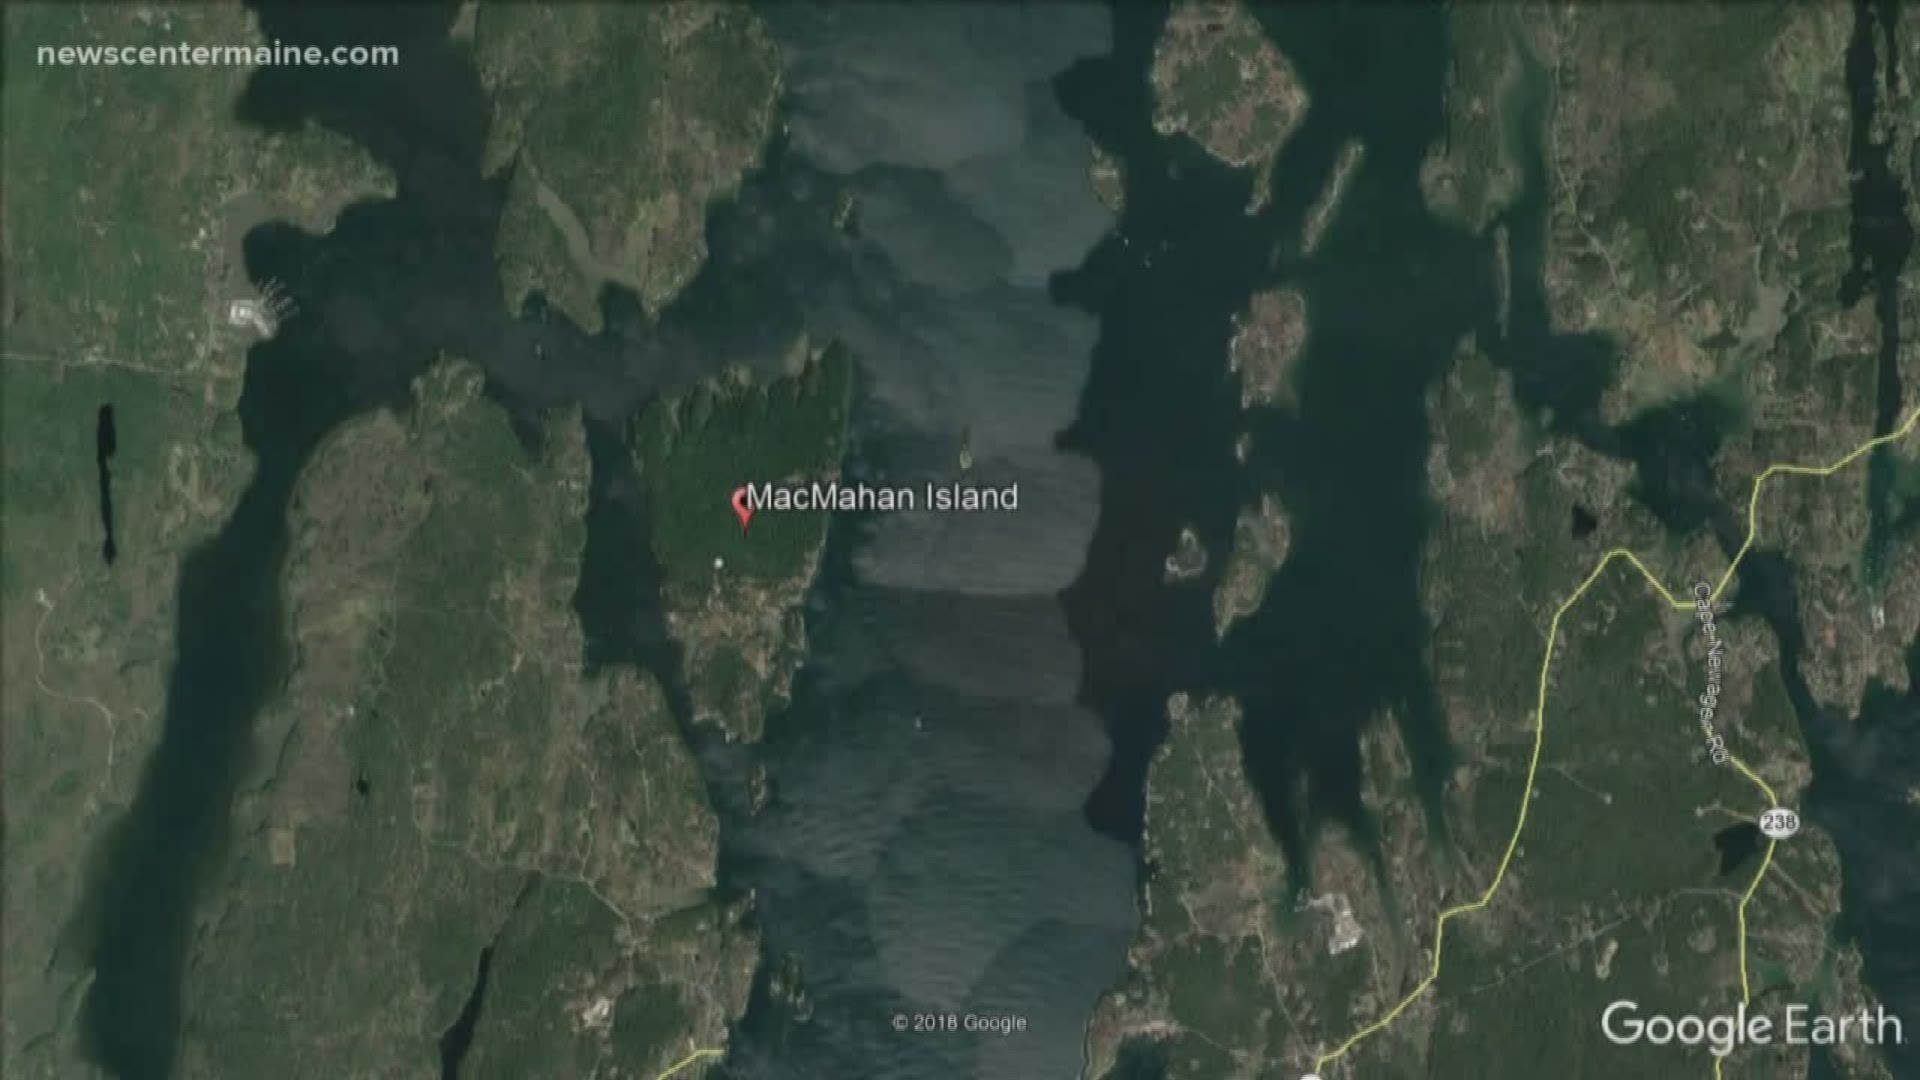 A man who crashed on a jet ski off of MacMahan island in the Sheepscot river was taken to Maine Medical Center.